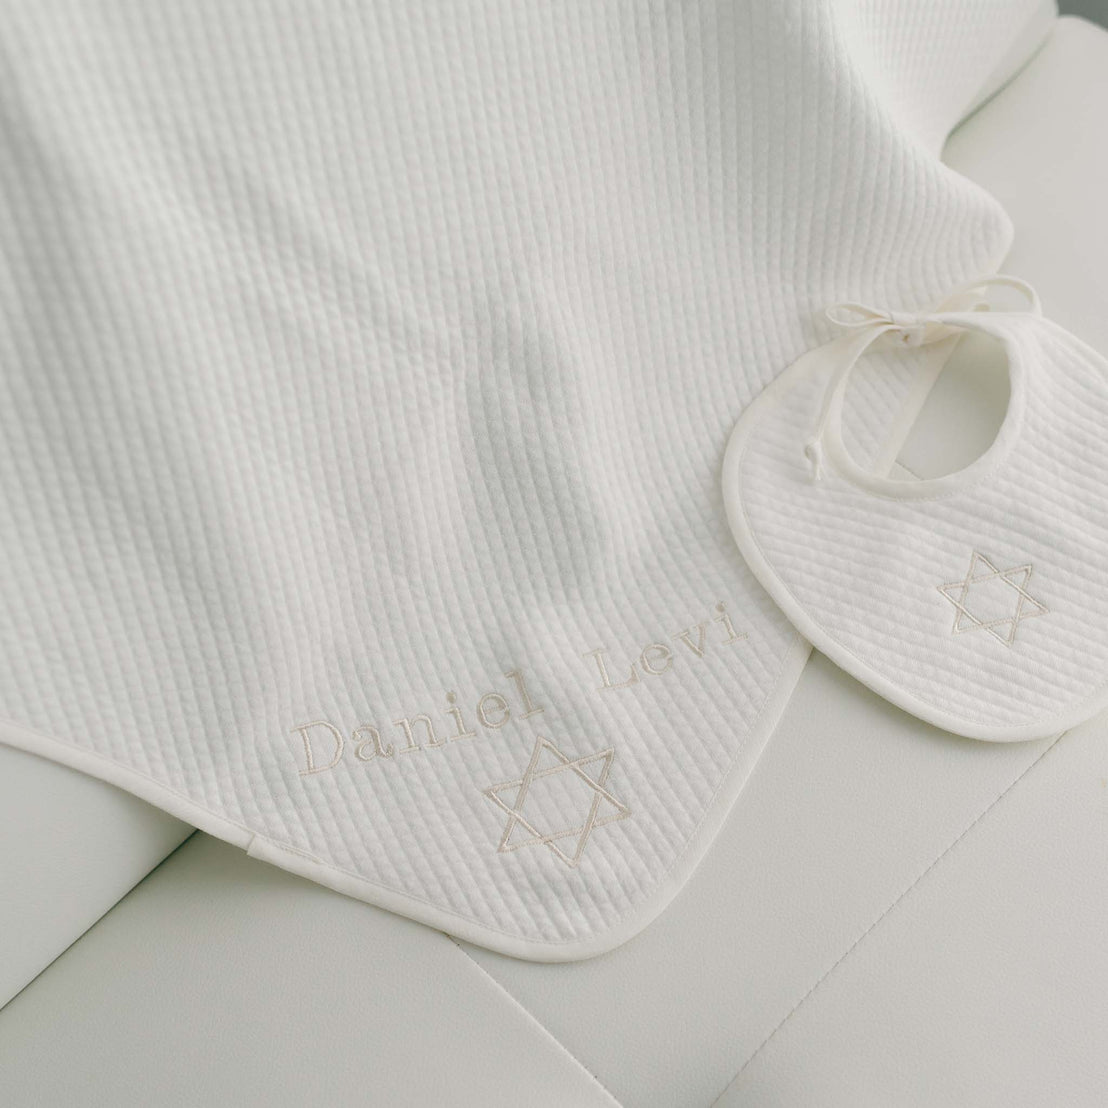 Star of David embroidery on ivory quilted cotton Bris bib and blanket